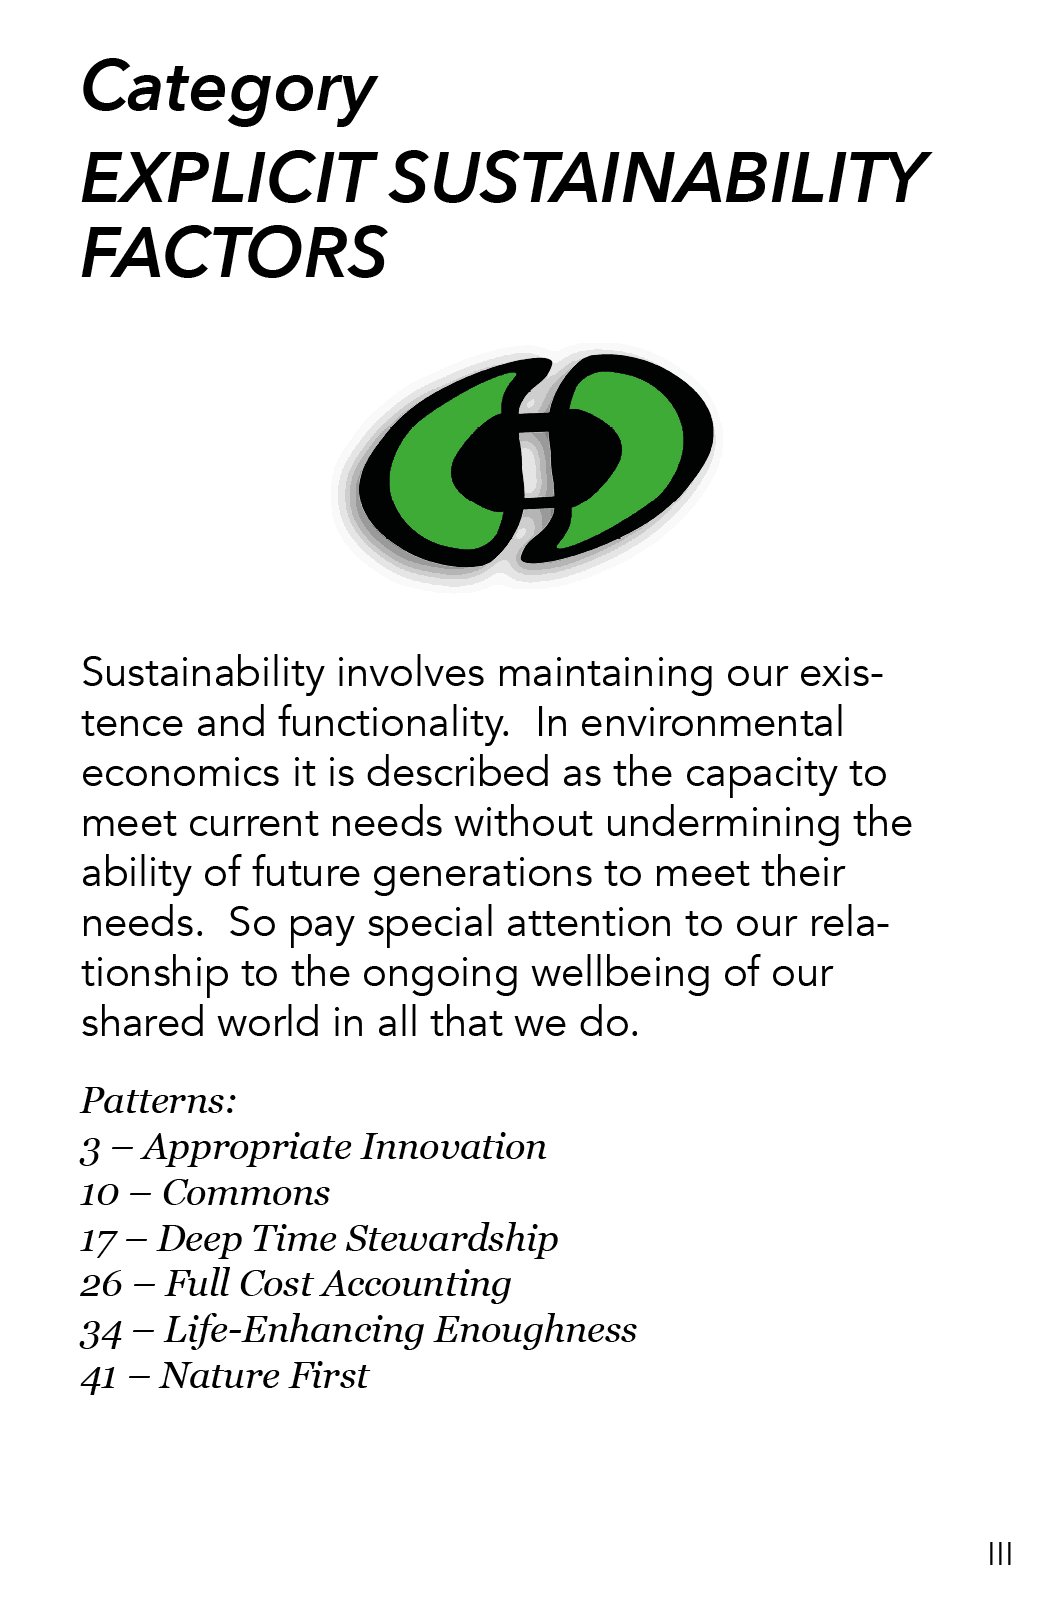 Category Card Explicit Sustainibility Factors